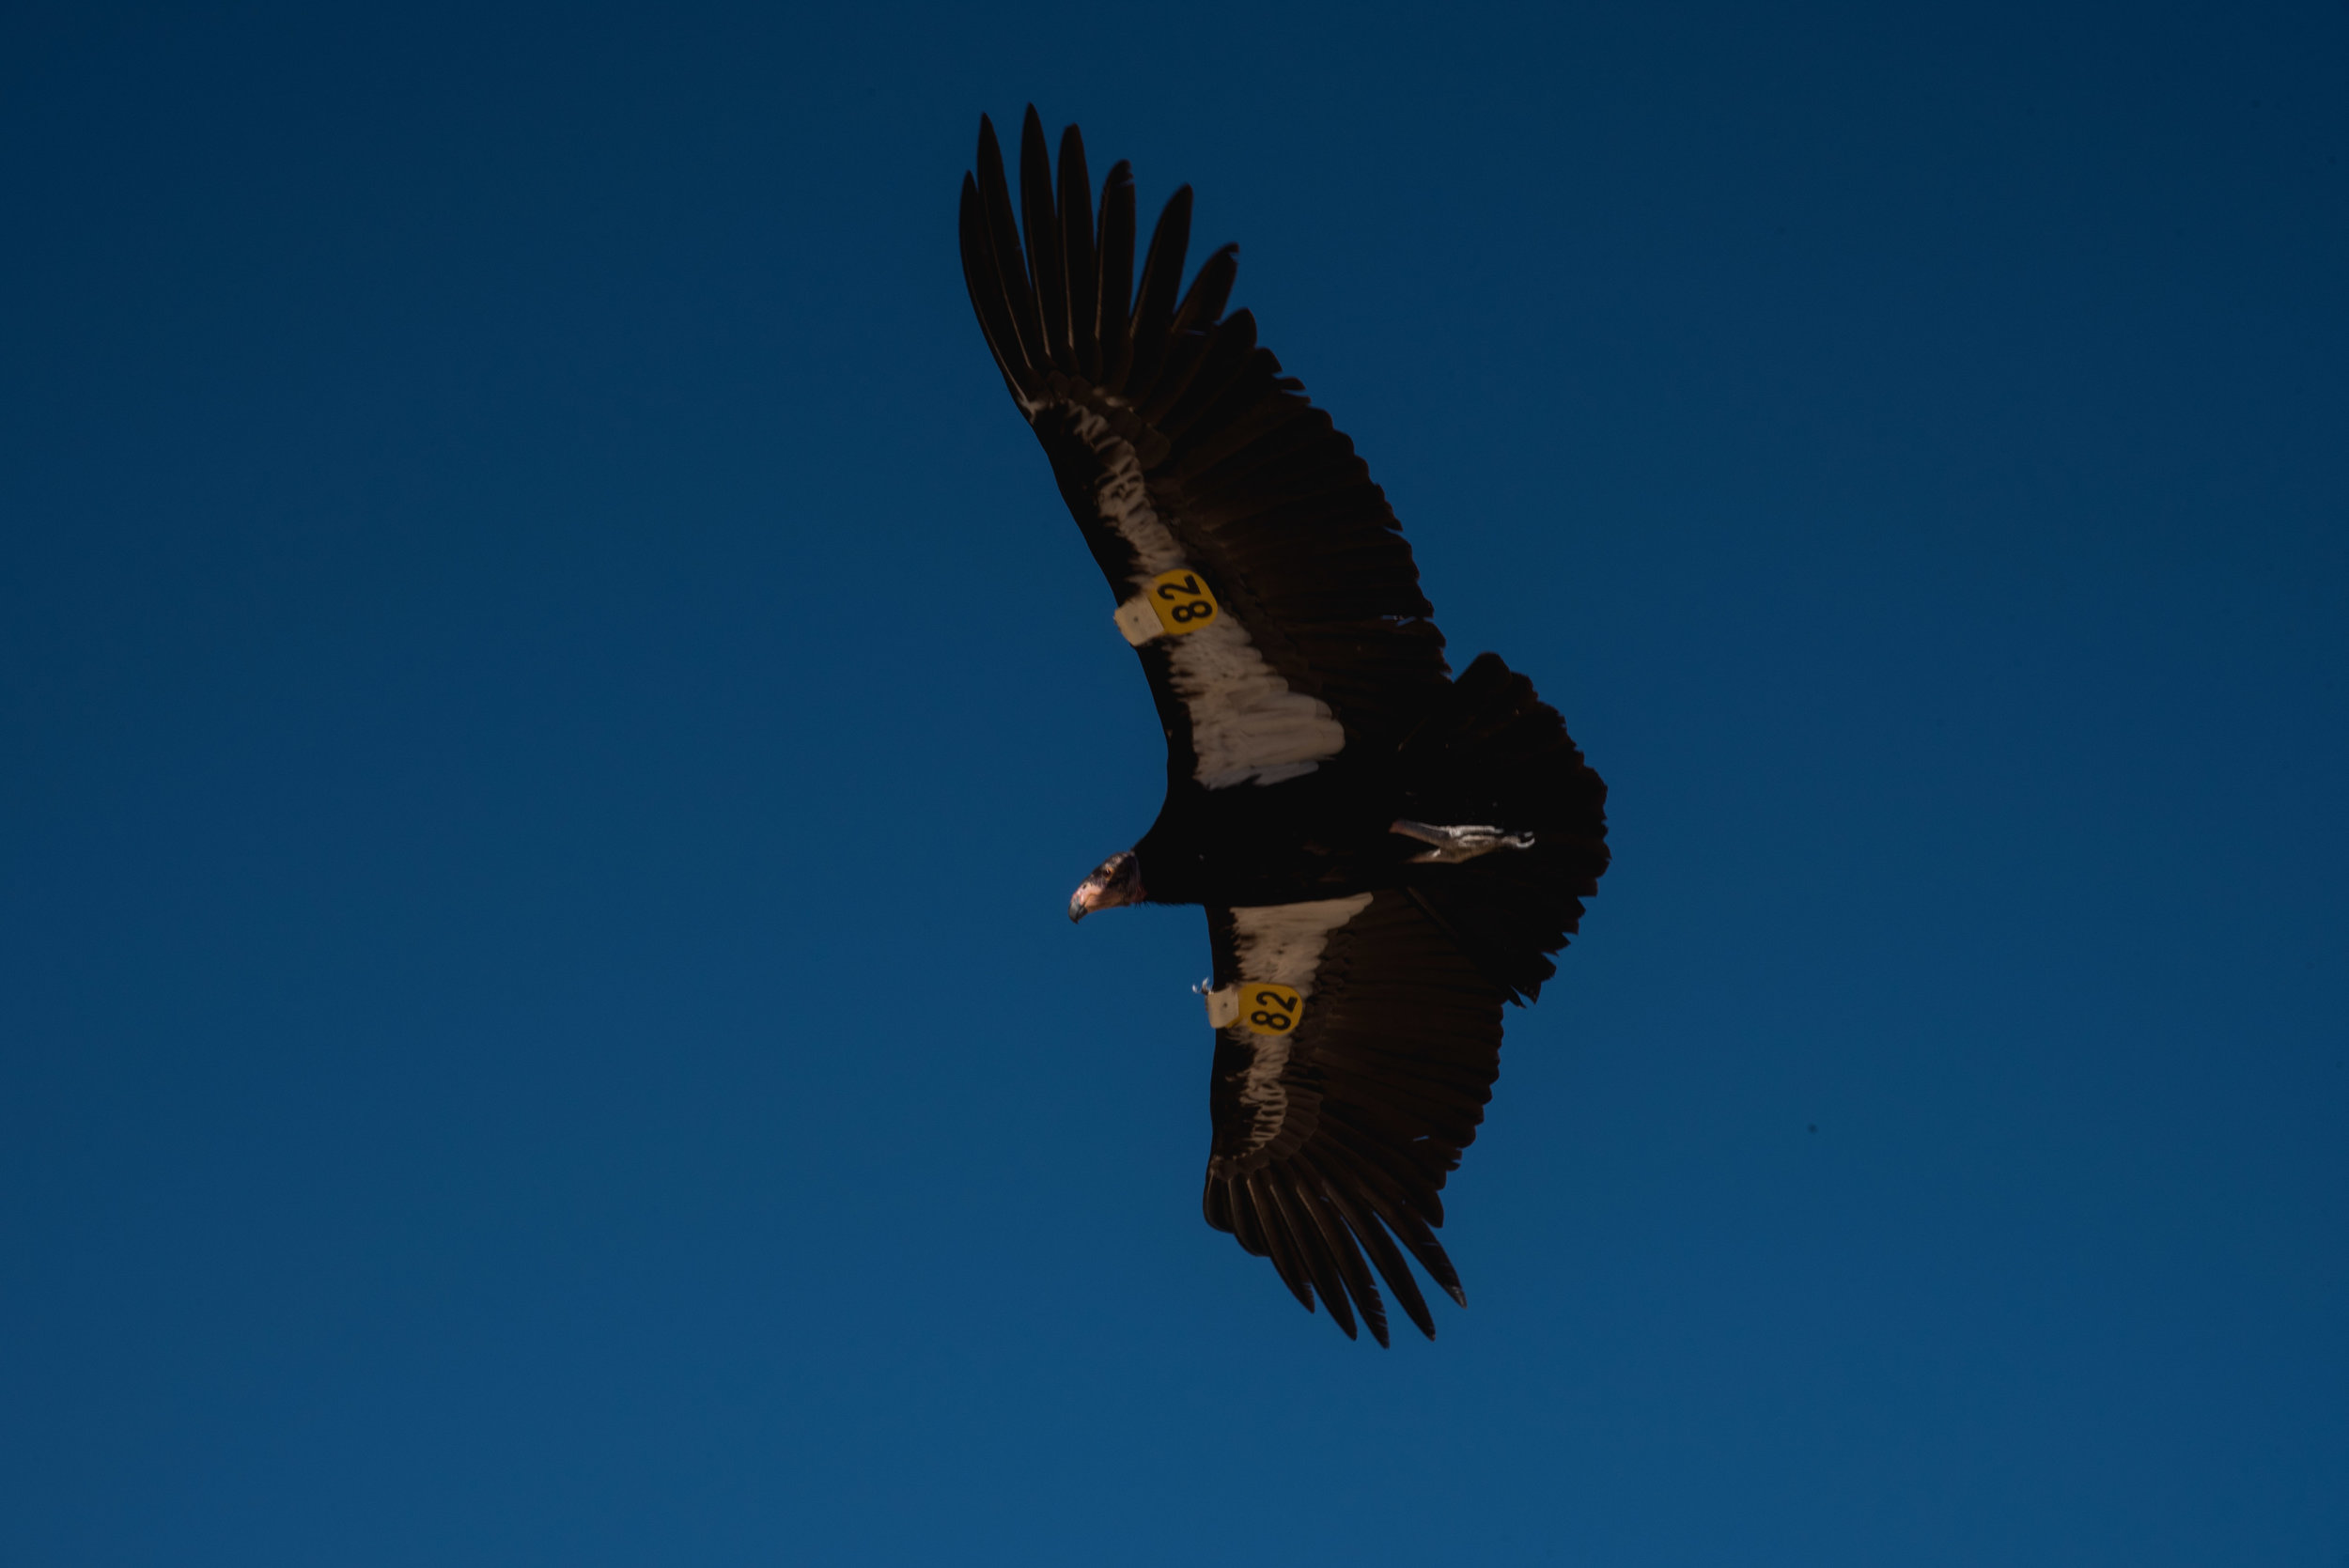  We found a California Condor reserve on accident. 